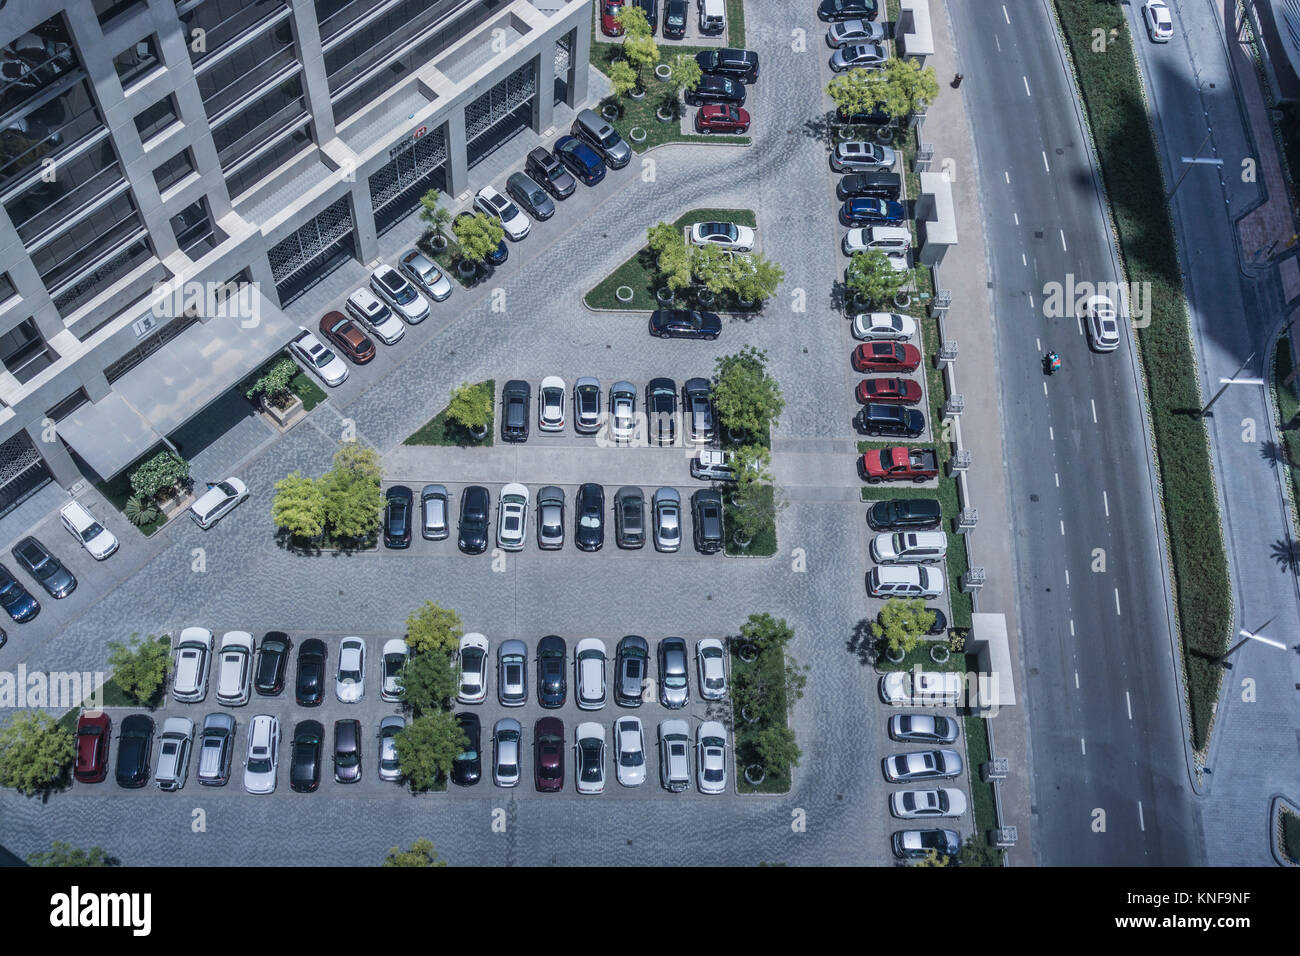 Aerial view of parking lot and highway, Dubai, United Arab Emirates Stock Photo